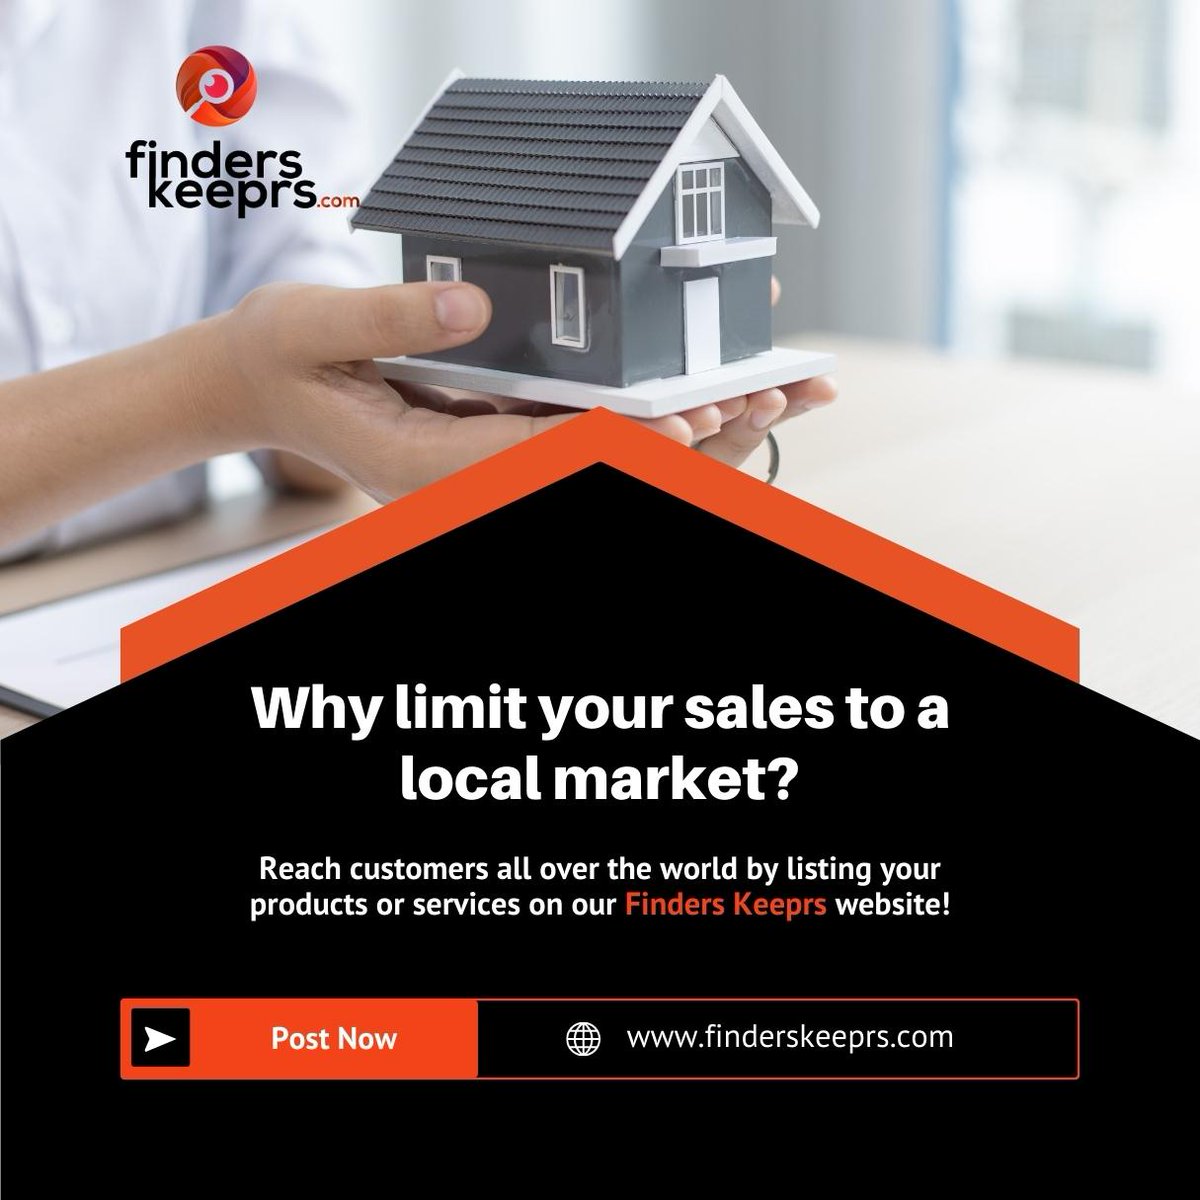 Expand your sales reach beyond local markets! Showcase your products and services to customers worldwide by listing them on our Finders Keeprs website. #GlobalSales #OnlineMarketplace'